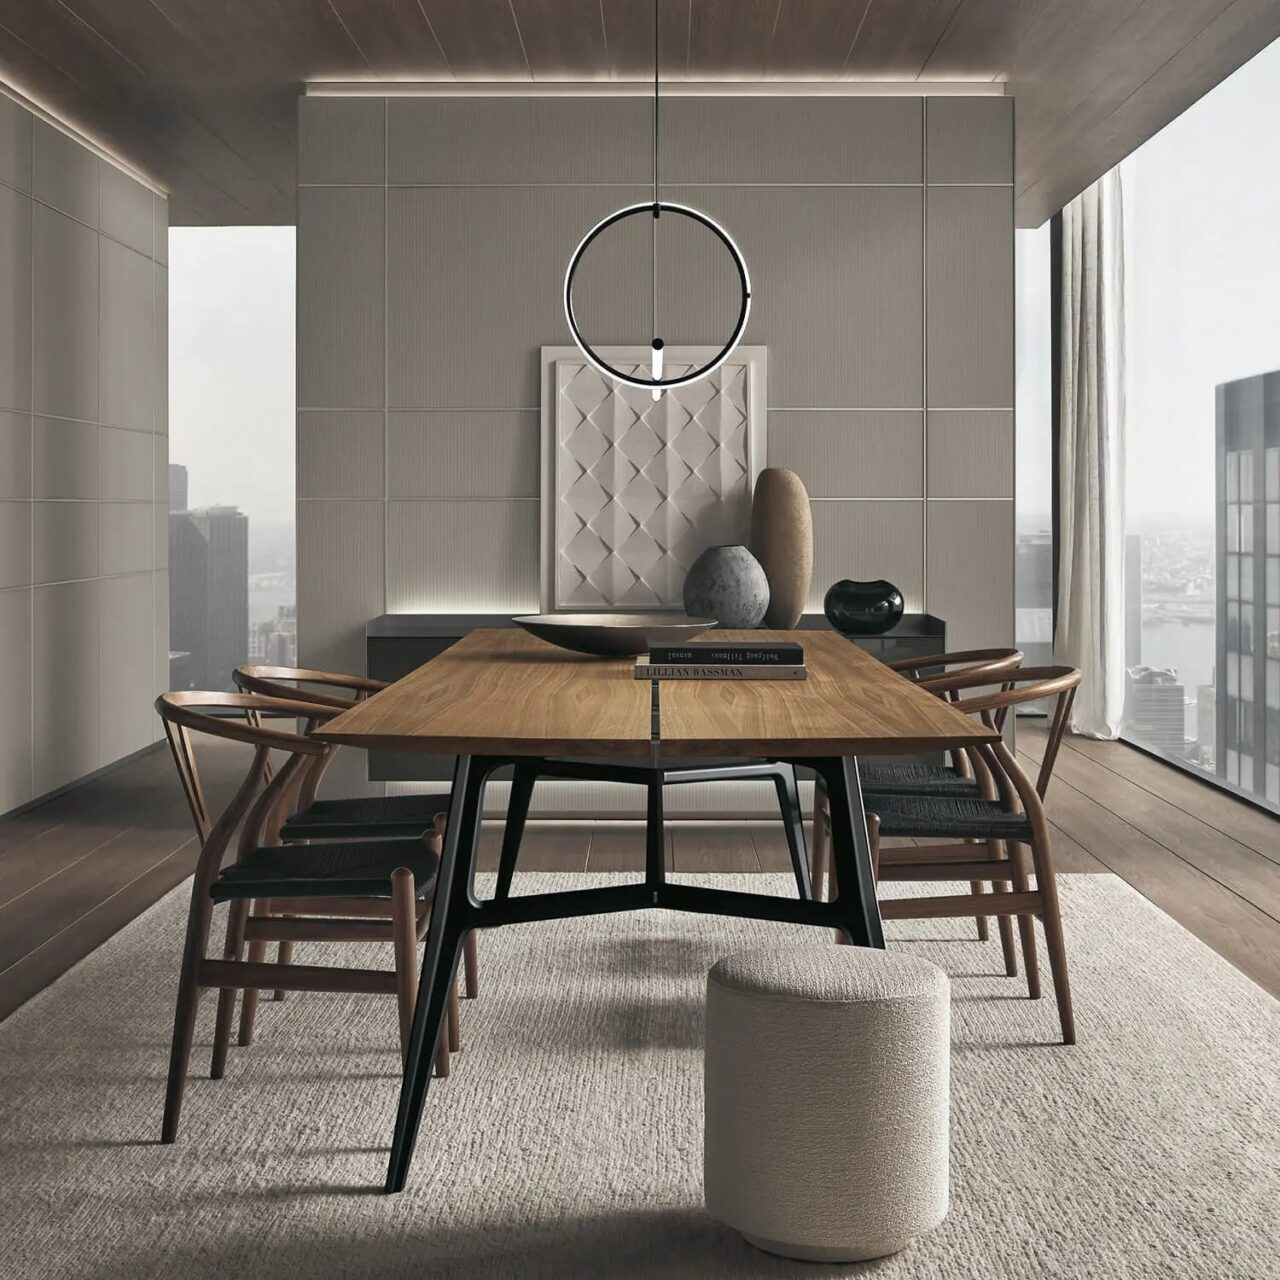 Planet is a dining table designed by Giuseppe Bavuso offered by Peverelli